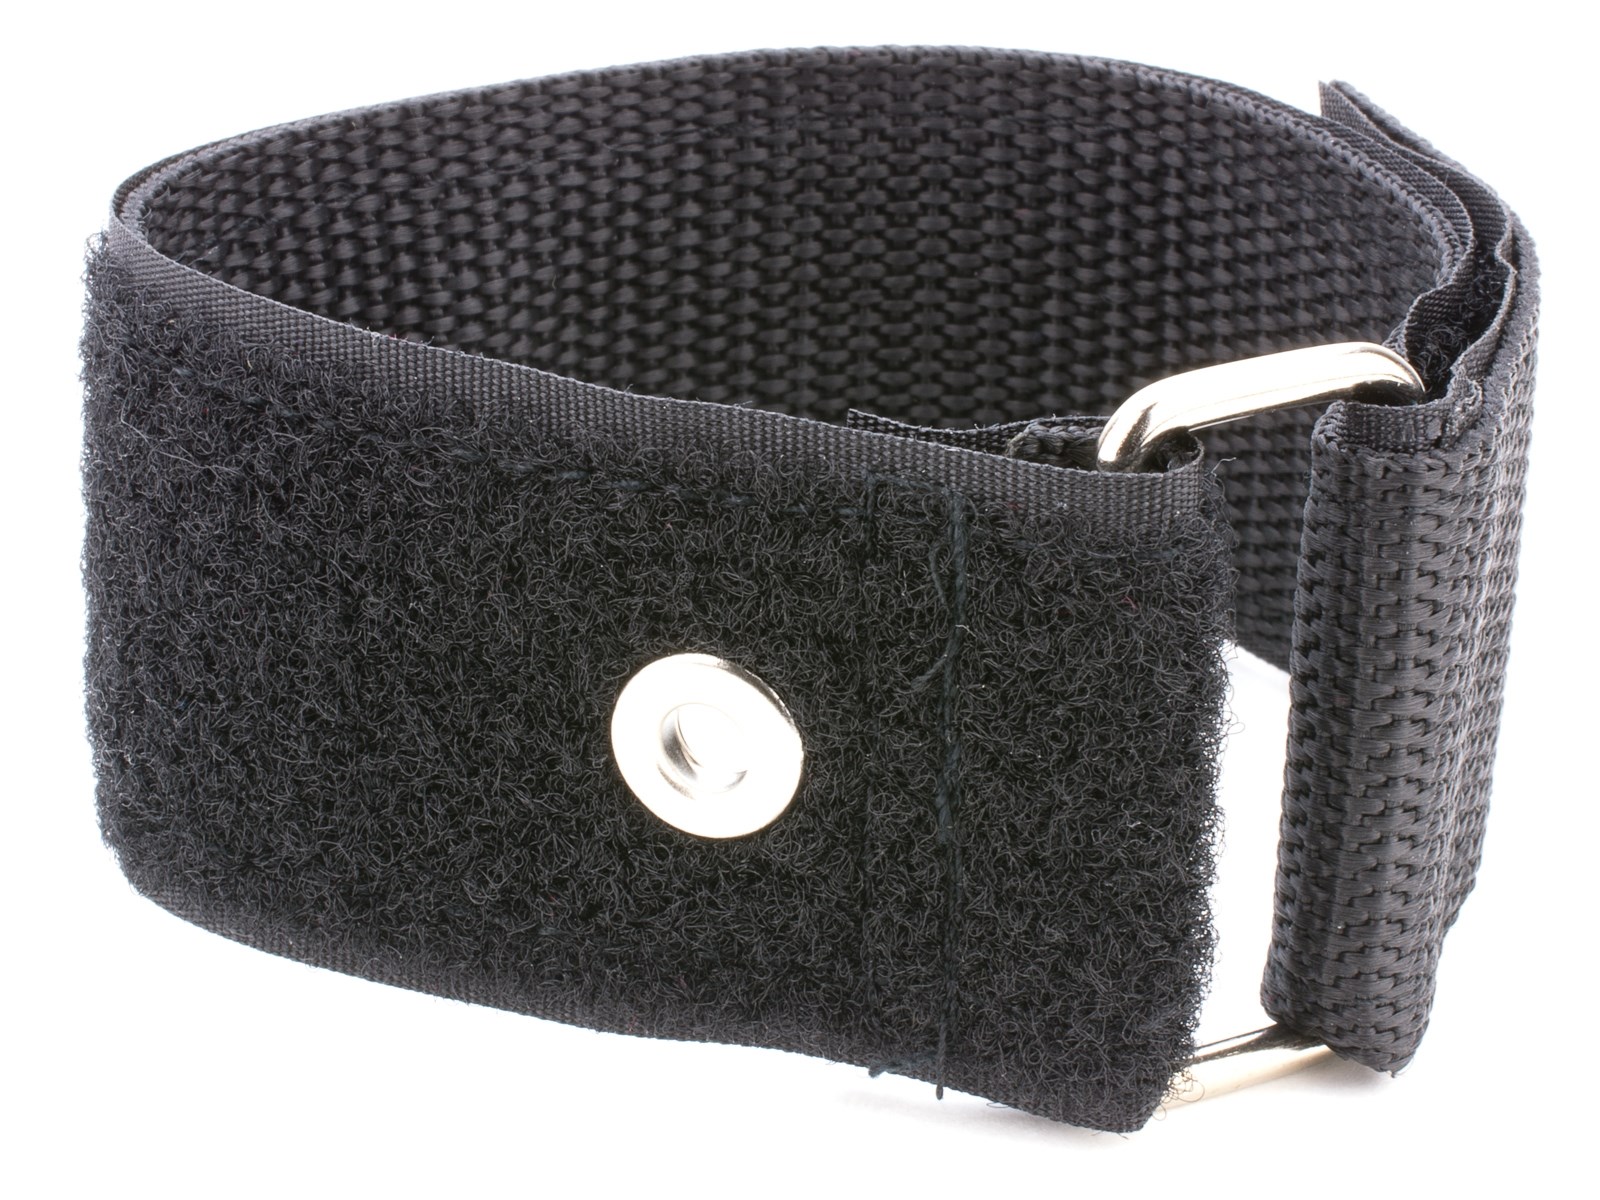 12 x 1 1/2 inch Heavy Duty Black Cinch Strap with Eyelet - 5 Pack